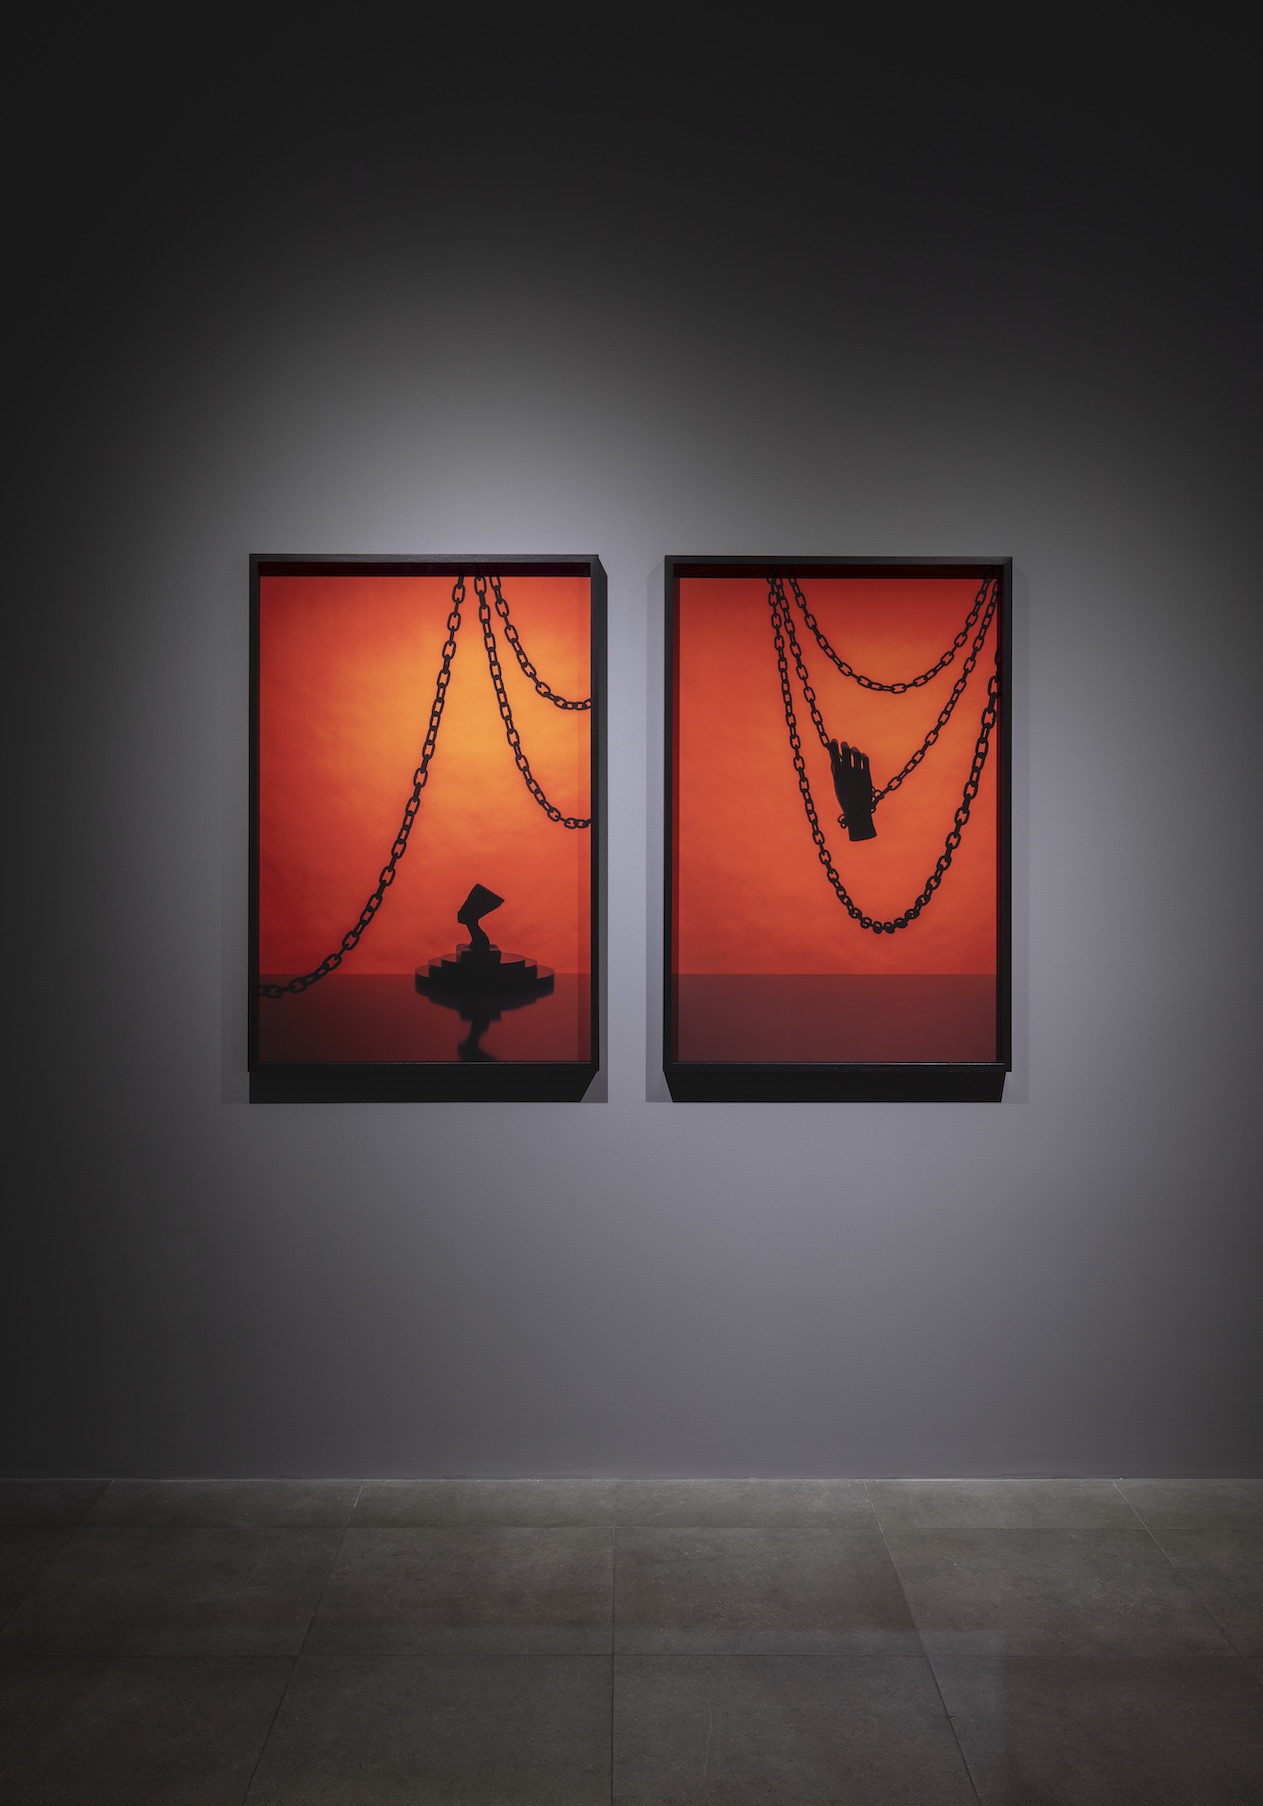 2- Anna Franceschini, THE PYRAMID PARADOX, 2020, Dyptych – Two digital prints on cotton paper mounted on dibond, 120x80 cm each, overall dimensions: 120 x 181 x 6 cm